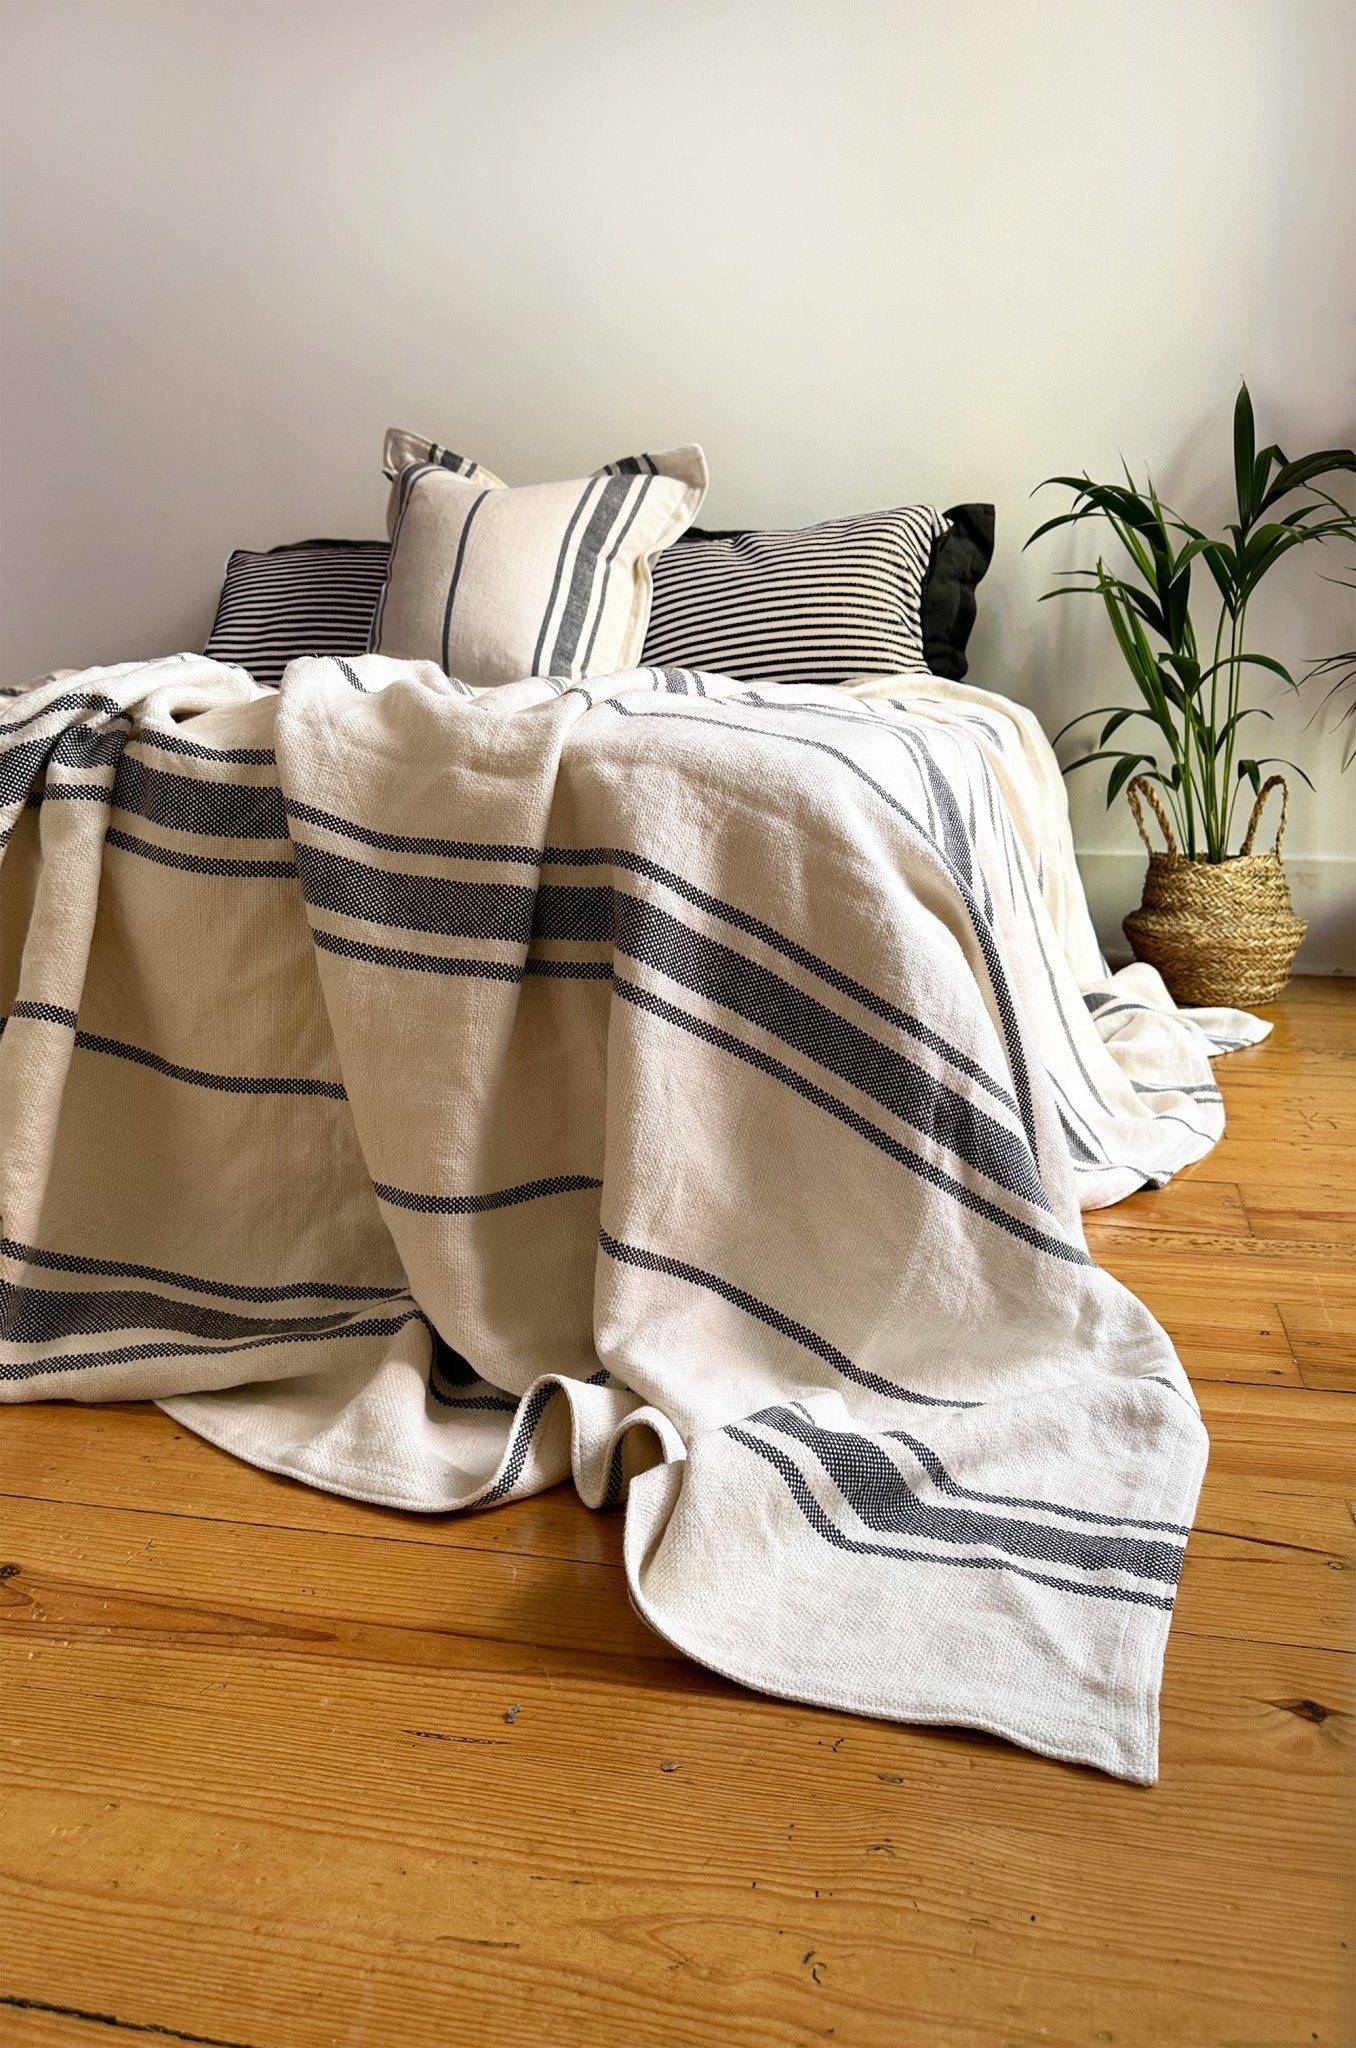 Striped Heavy Linen Bed Throw Blanket in Grey and Cream - Biggs & Hill - Blanket - Bedspread - blanket - charcoal